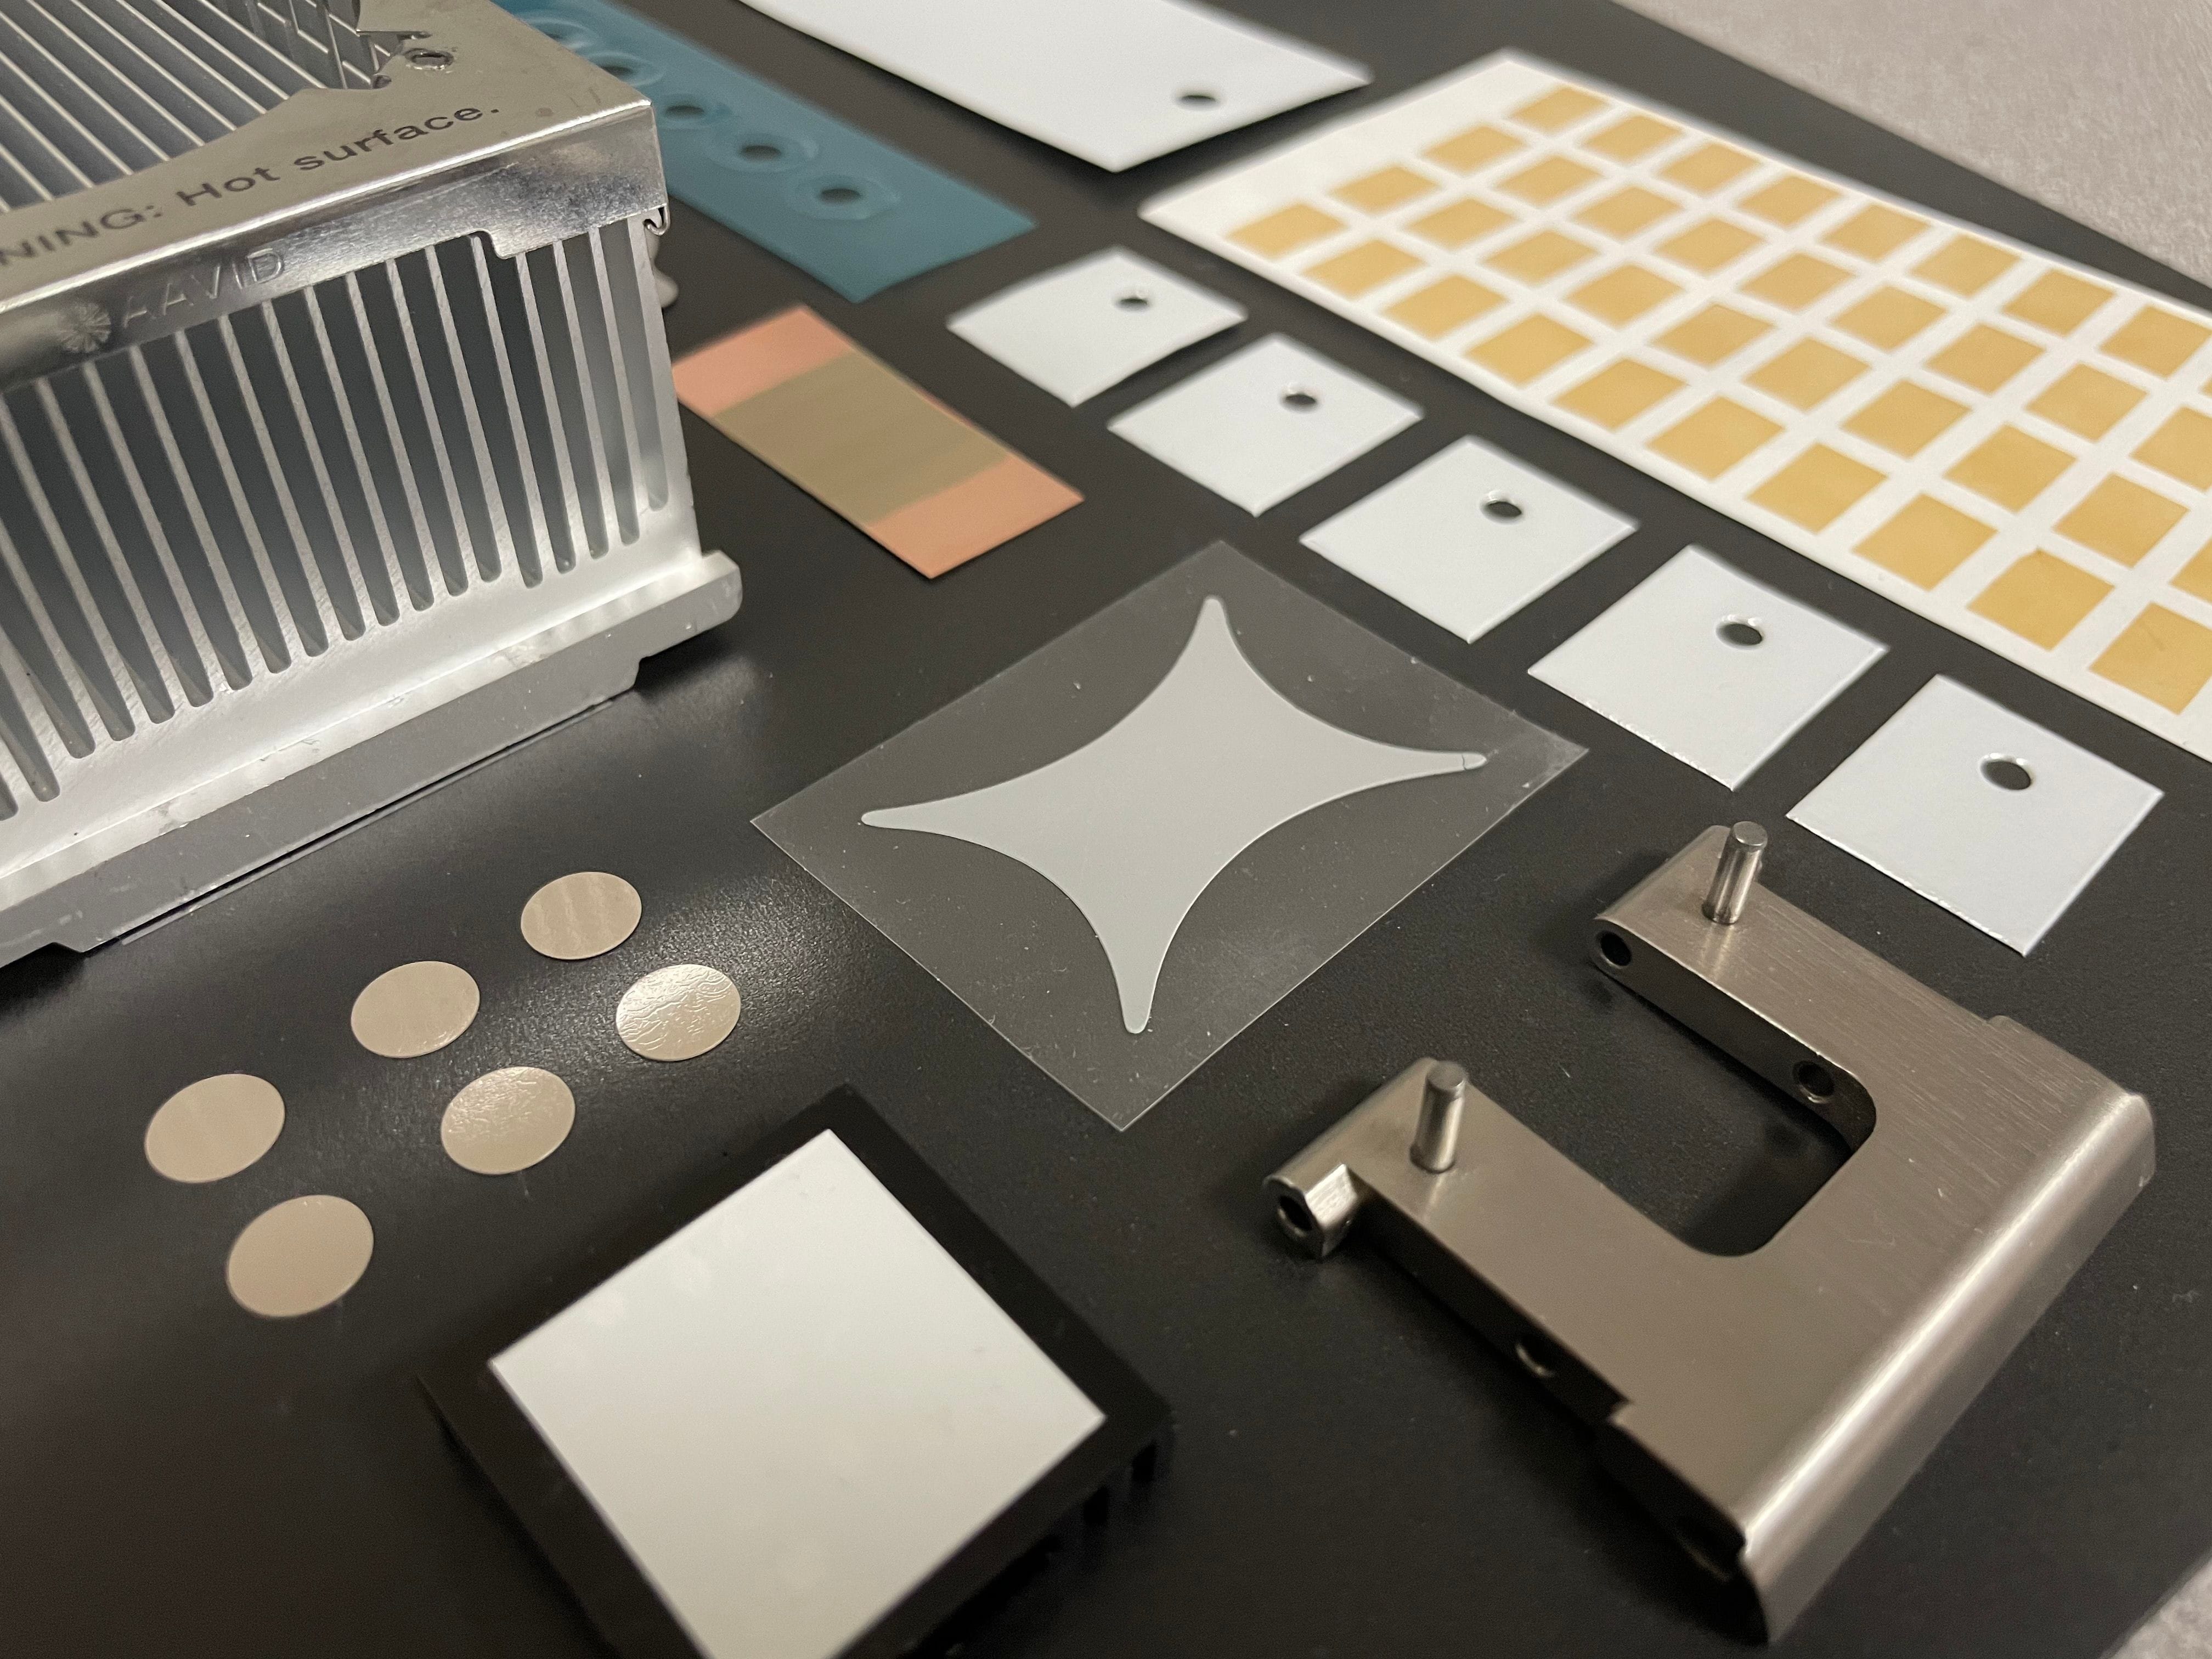 Thermal Interface Material and Adhesive Film prototypes for product development.  Includes a range of thermal material and adhesives from heat activated and PSA